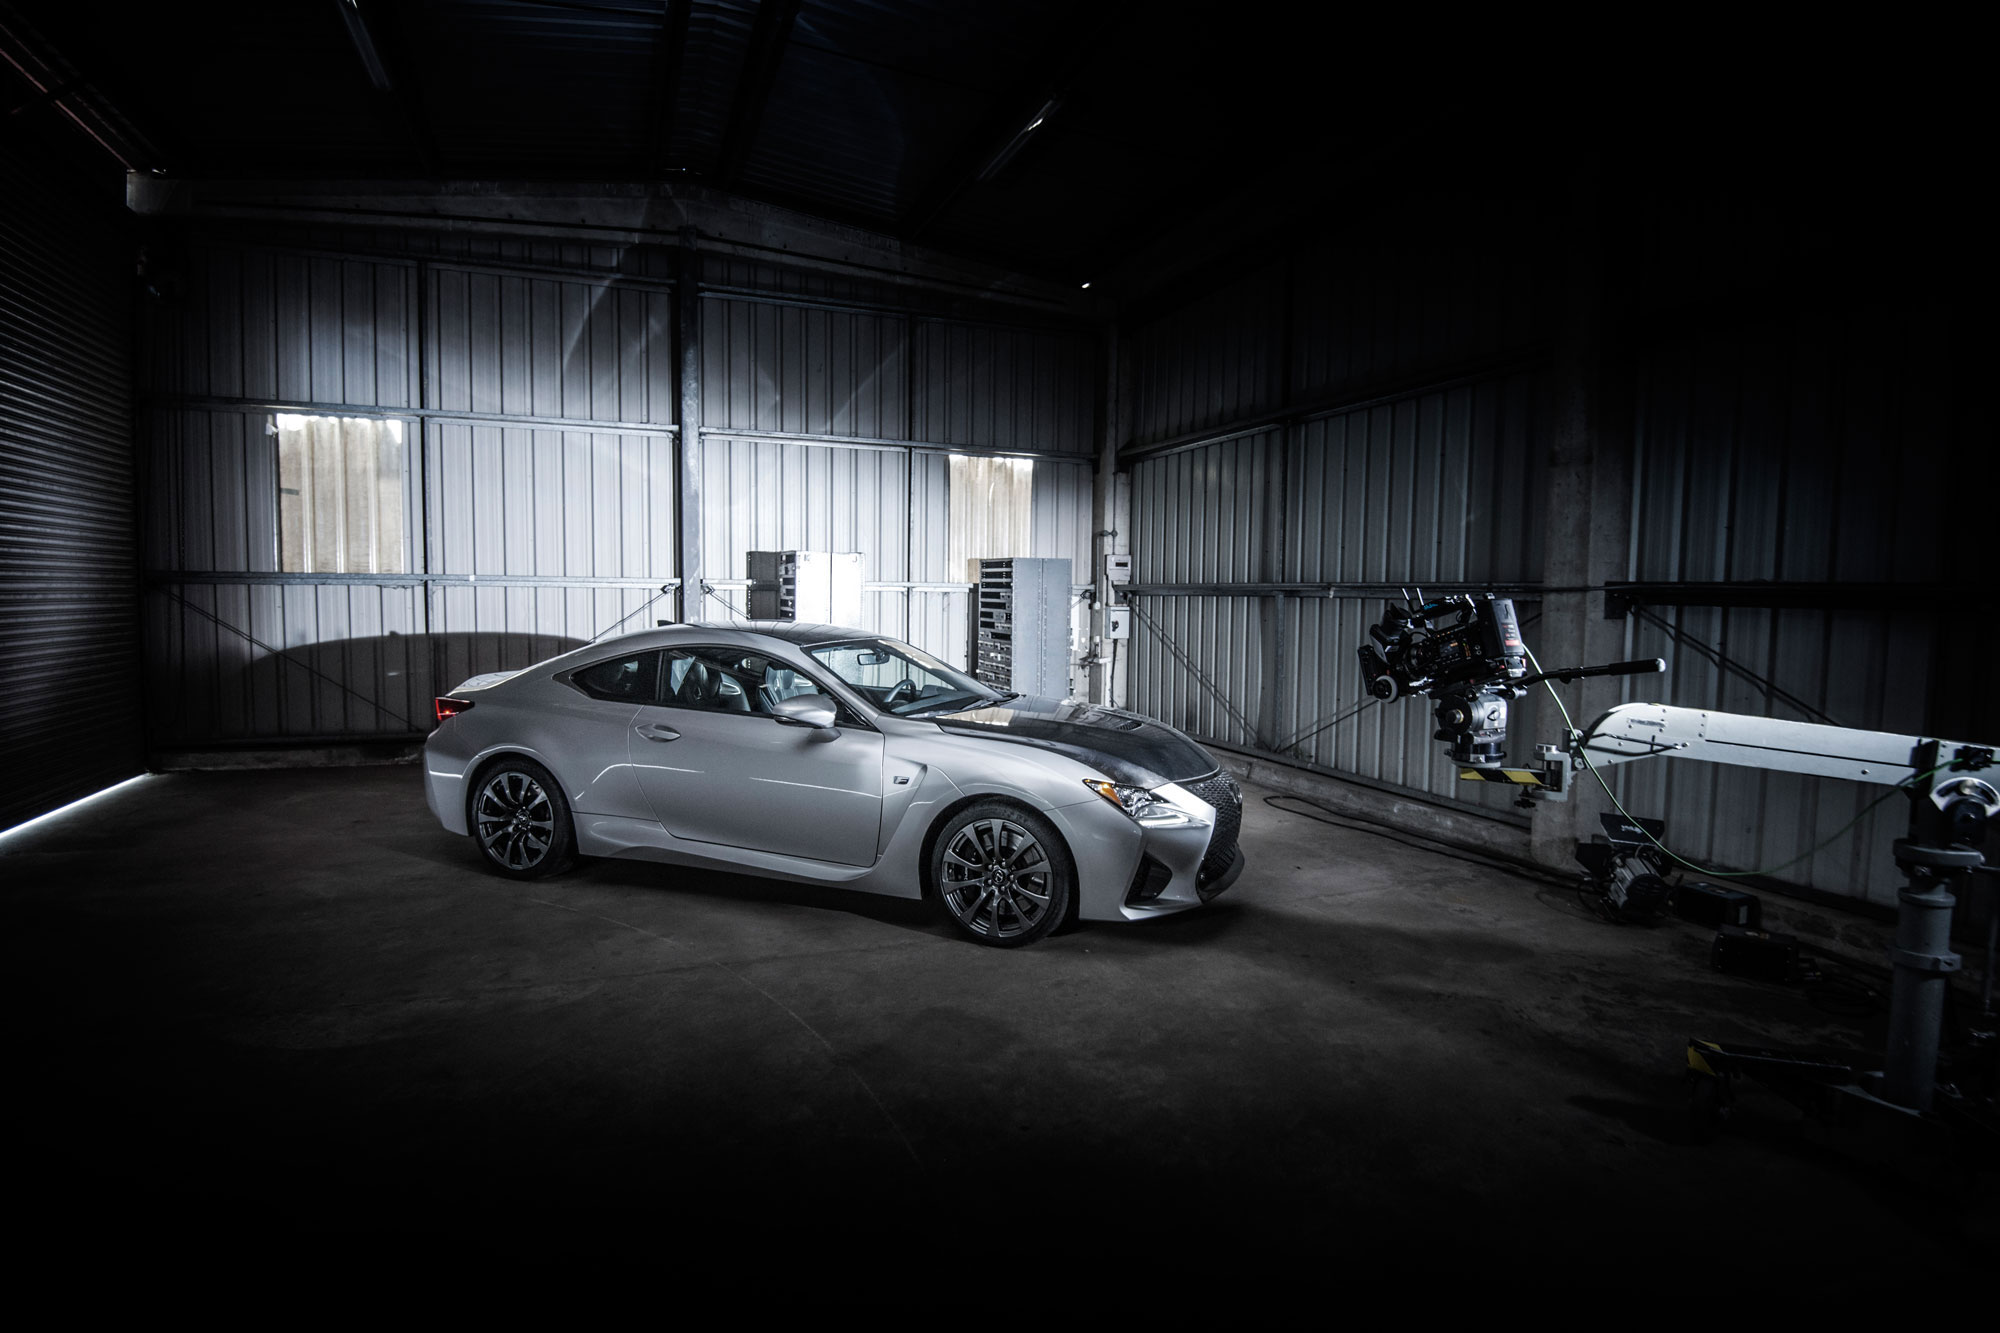 Lexus Cars News Rc F Makes First Driving Debut At Goodwood